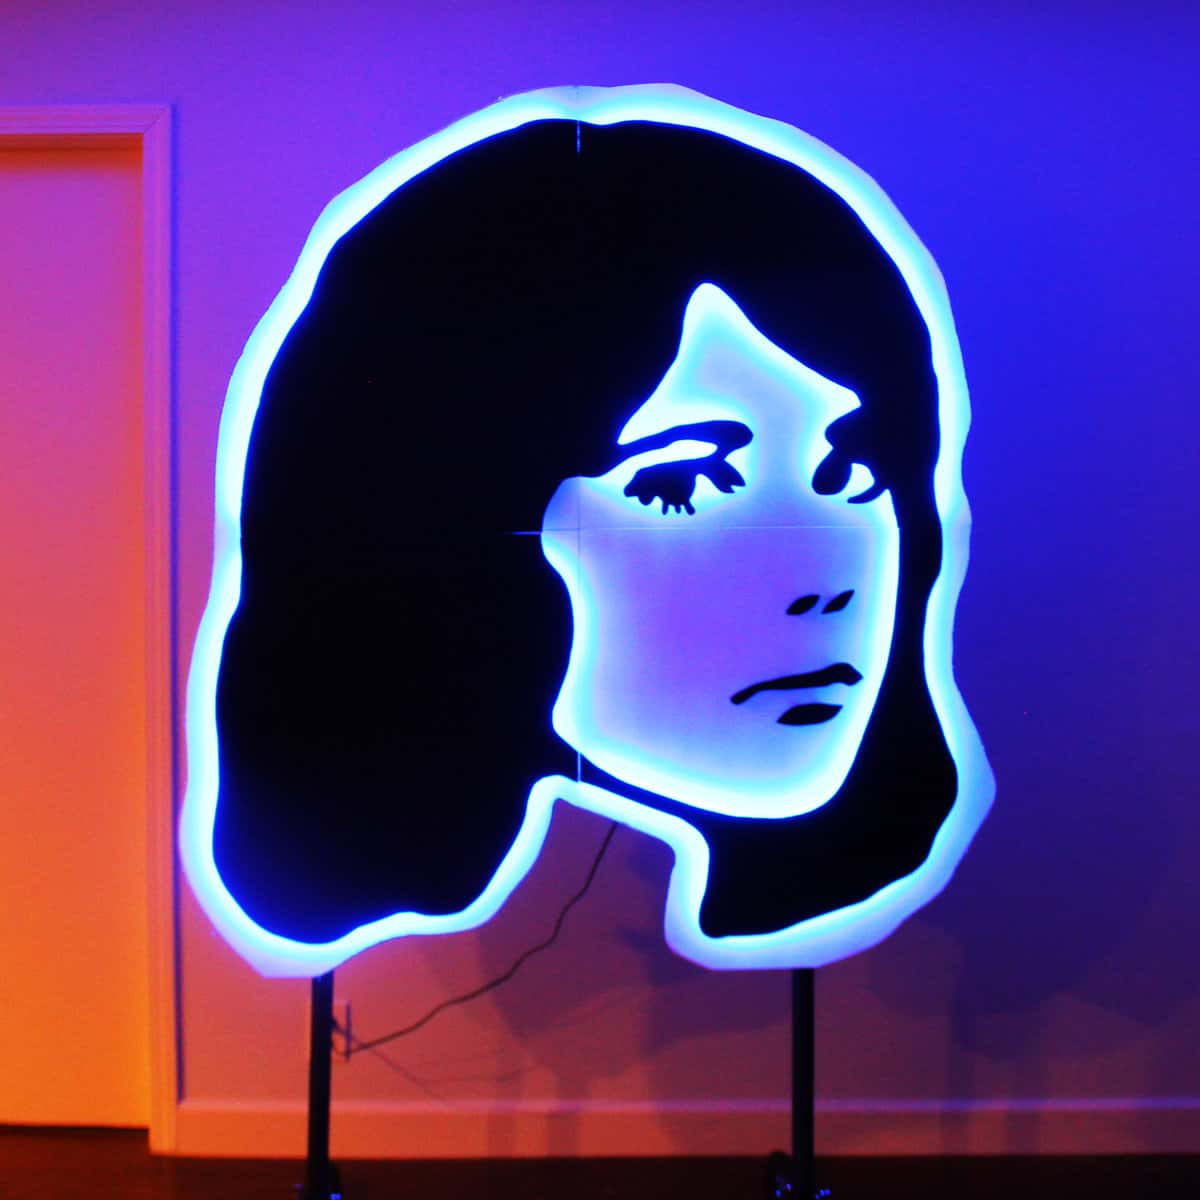 Neon outline of a woman's face on a red, blue, and purple background